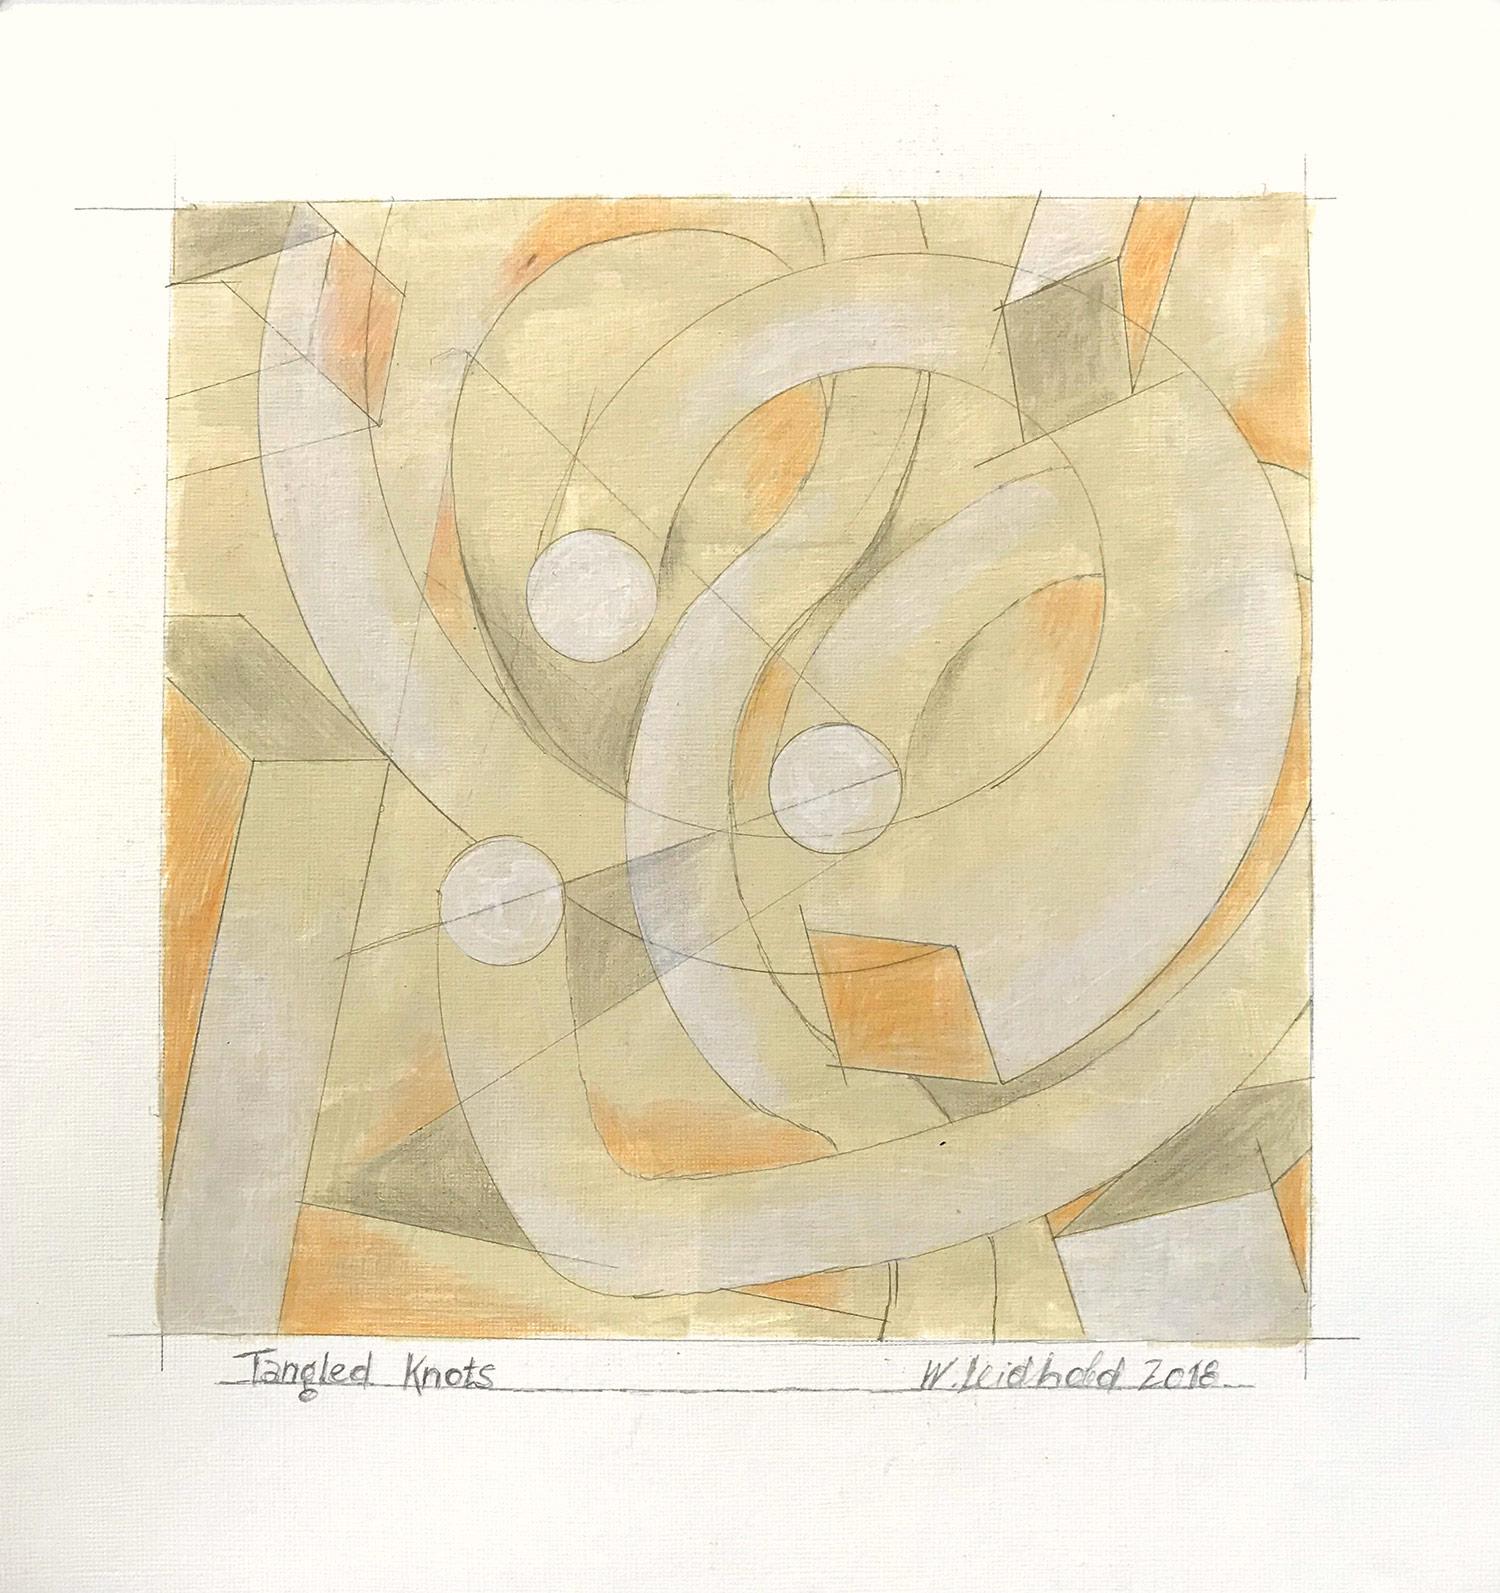 Wolfgang Leidhold Figurative Painting - "Tangled Knot" Abstract Representational Kinetic Knot Painting Work on Paper